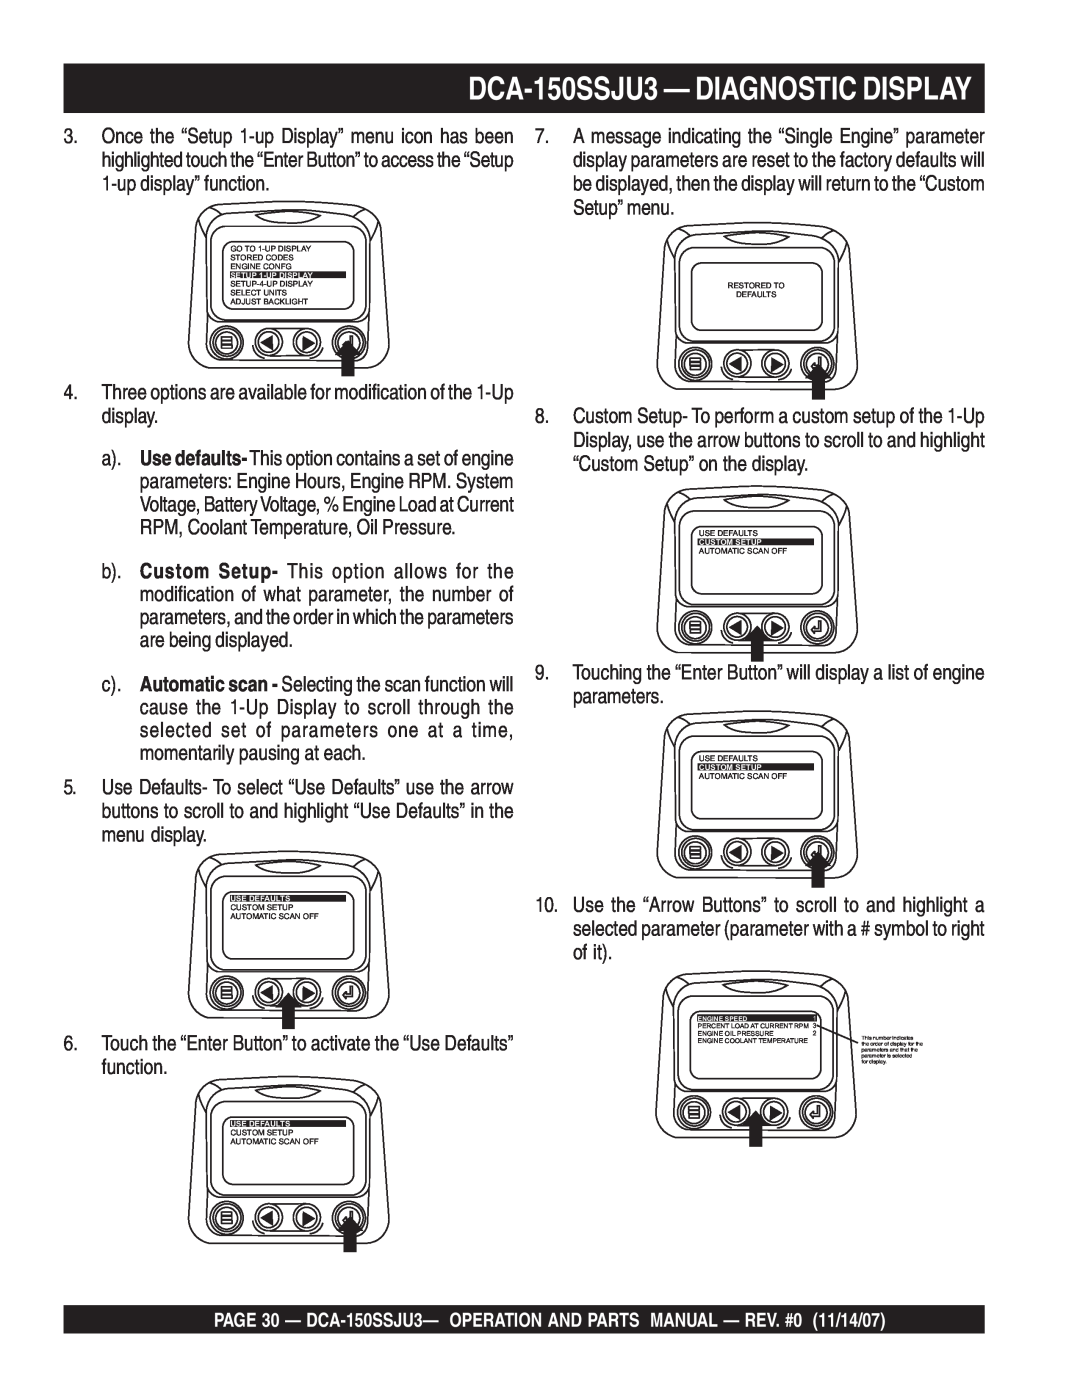 Multiquip operation manual DCA-150SSJU3— DIAGNOSTIC DISPLAY, Once the “Setup 1-upDisplay” menu icon has been 